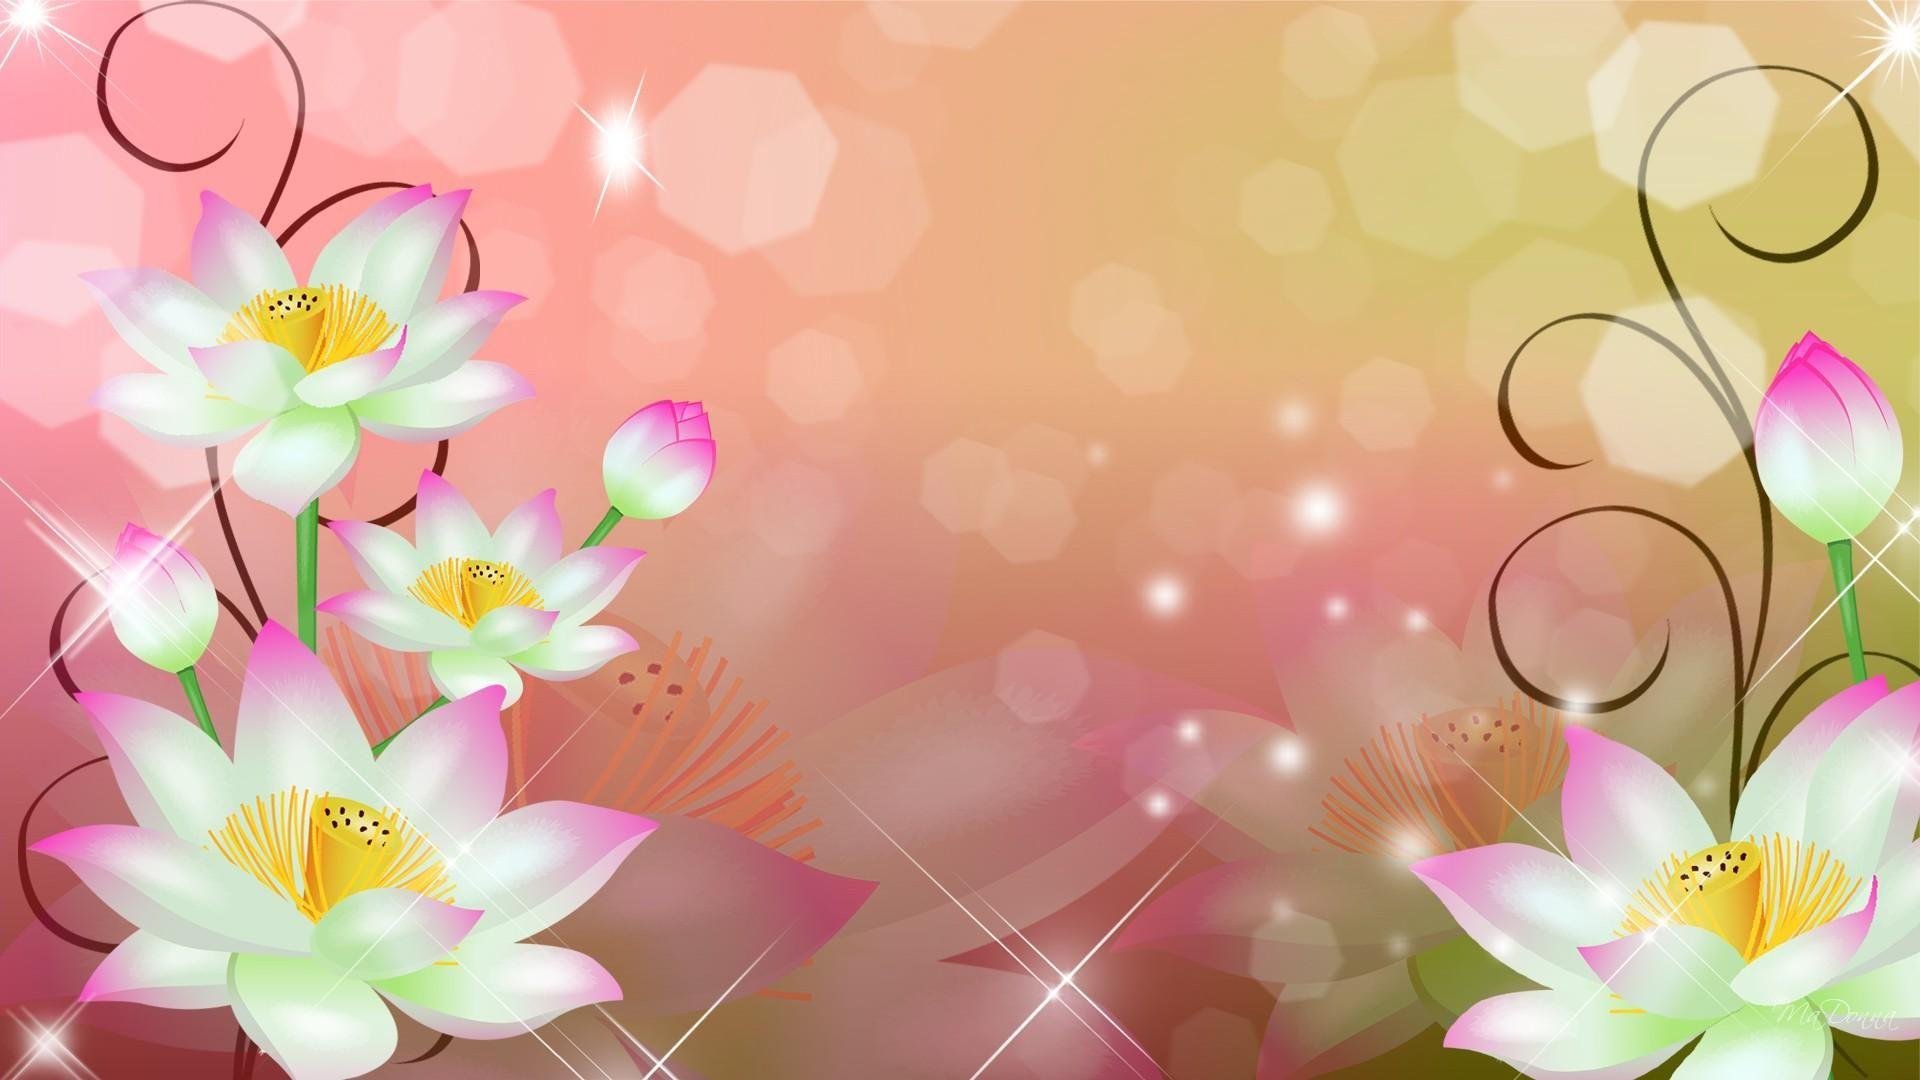 Firefox persona flowers bokeh abstract water wallpaper lily pink